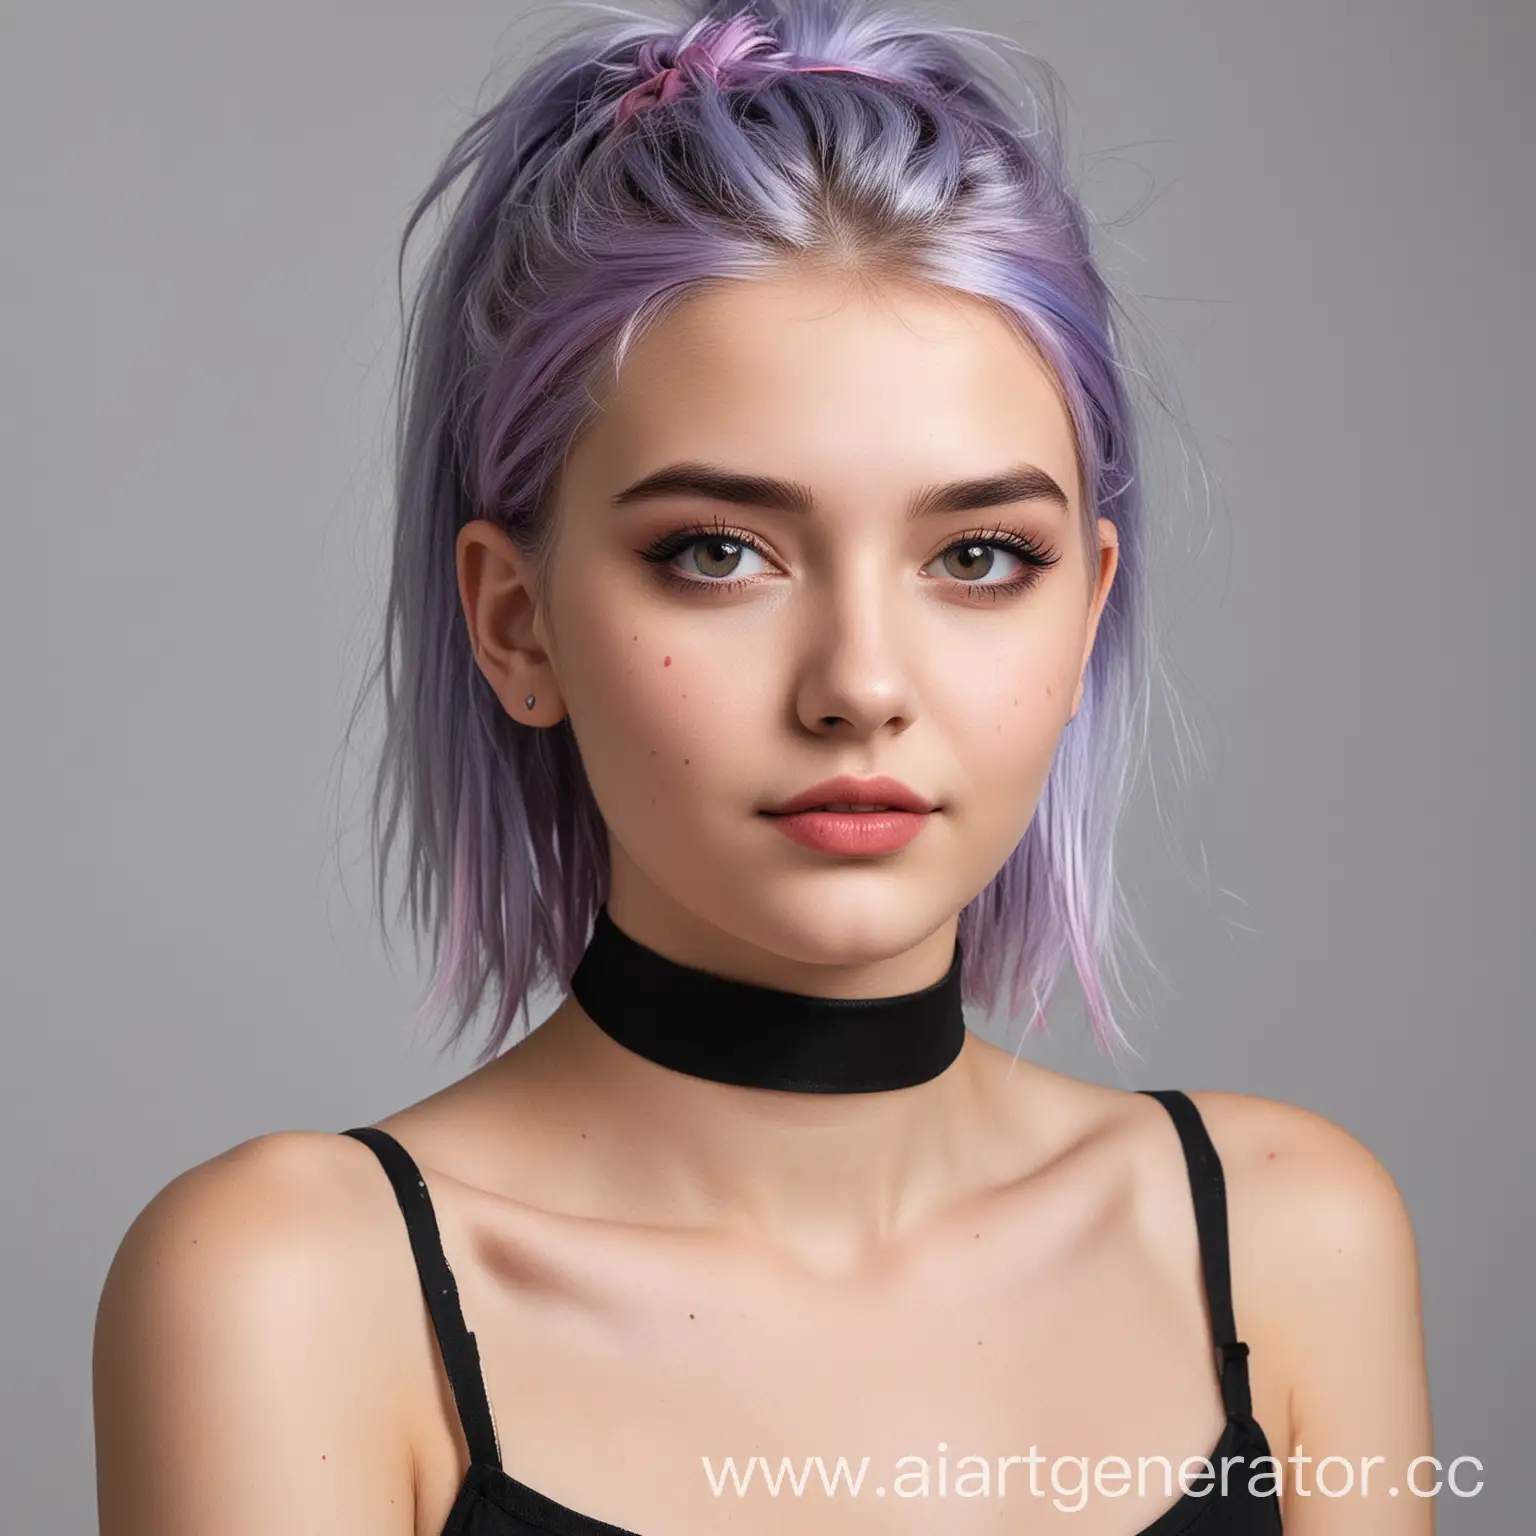 Young-Woman-with-Vibrantly-Painted-Hair-and-Choker-Necklace